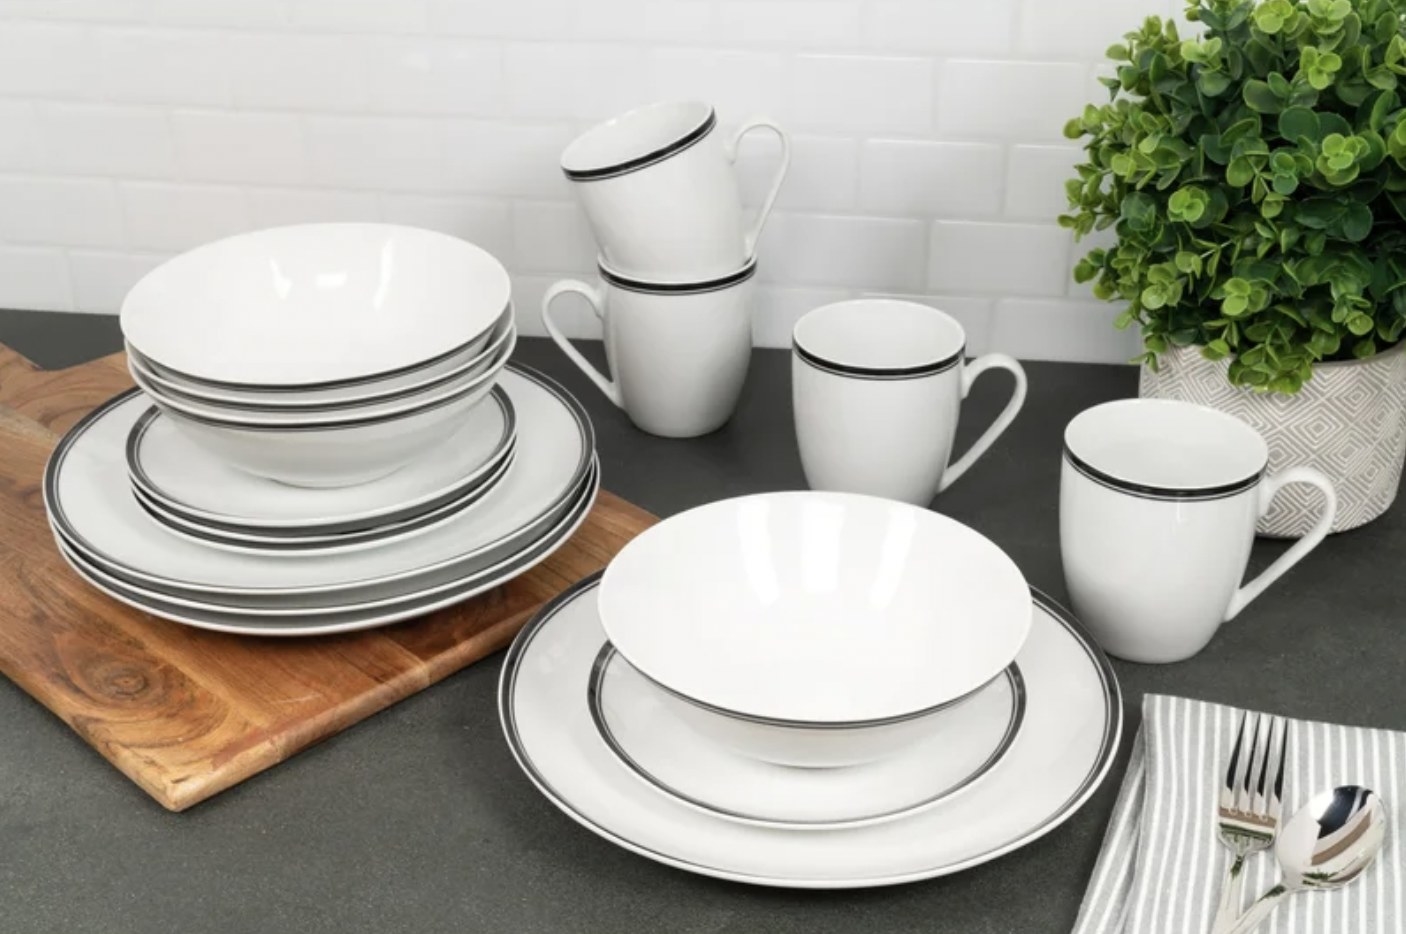 the white dishes with grey trim